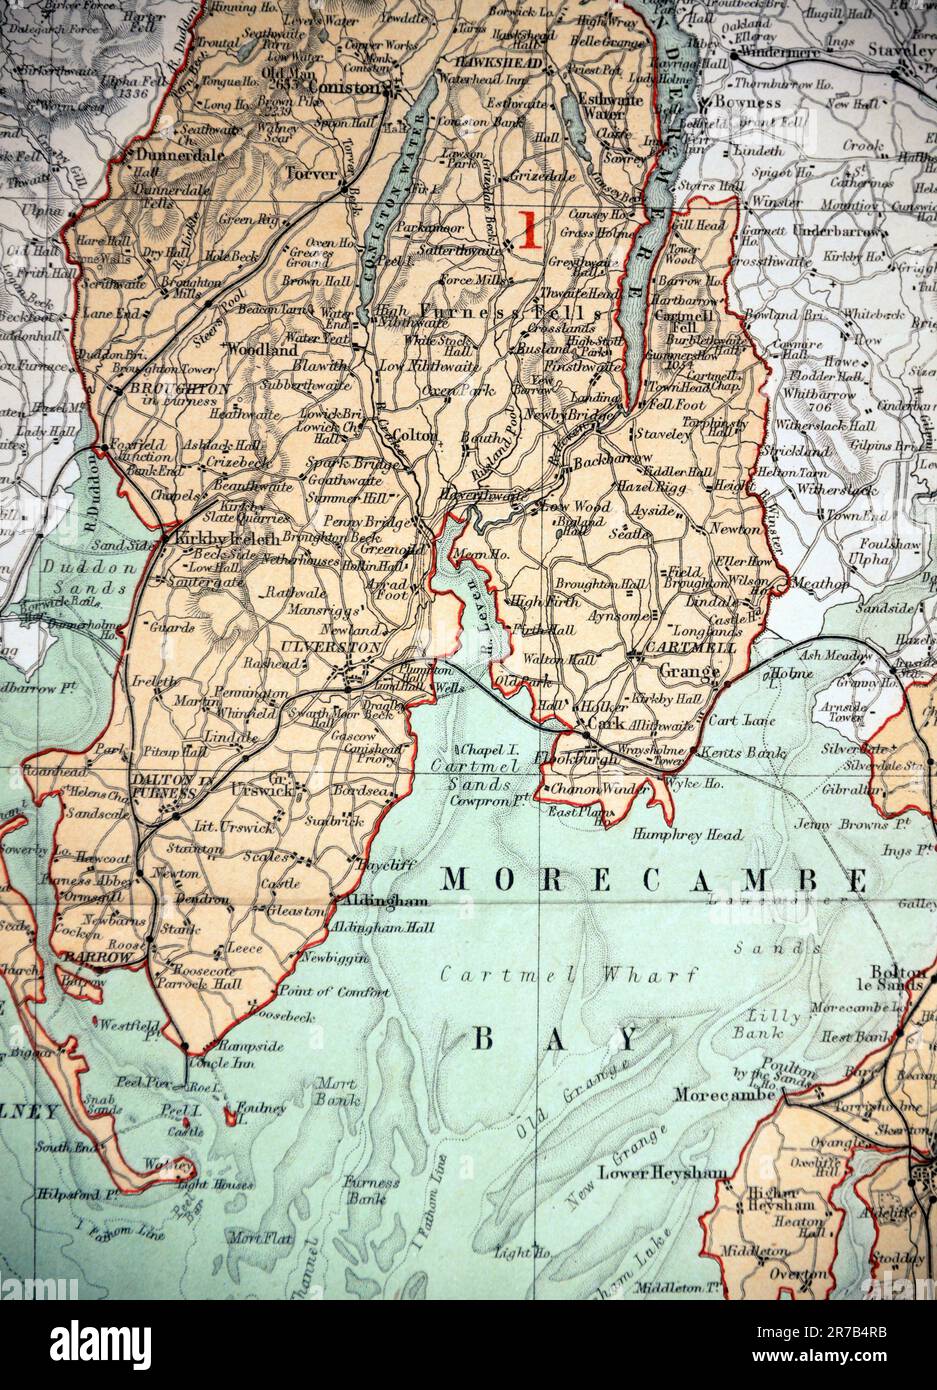 Detail from an 1868 Map of the County Palatine of Lancaster, so Lancashire as it was then, From the Ordnance Survey by J. Bartholomew F.R.G.S.; this section including Morecambe, Lower Heysham, Cartmell, Ulverston, Dalton in Furness, Bardsea, Grange, Broughton in Furness, Newby Bridge, Bolton le Sands, Cark, Flookburgh, Morecambe Bay.  In the cream tinted area at top right are Windermere and Bowness. Stock Photo